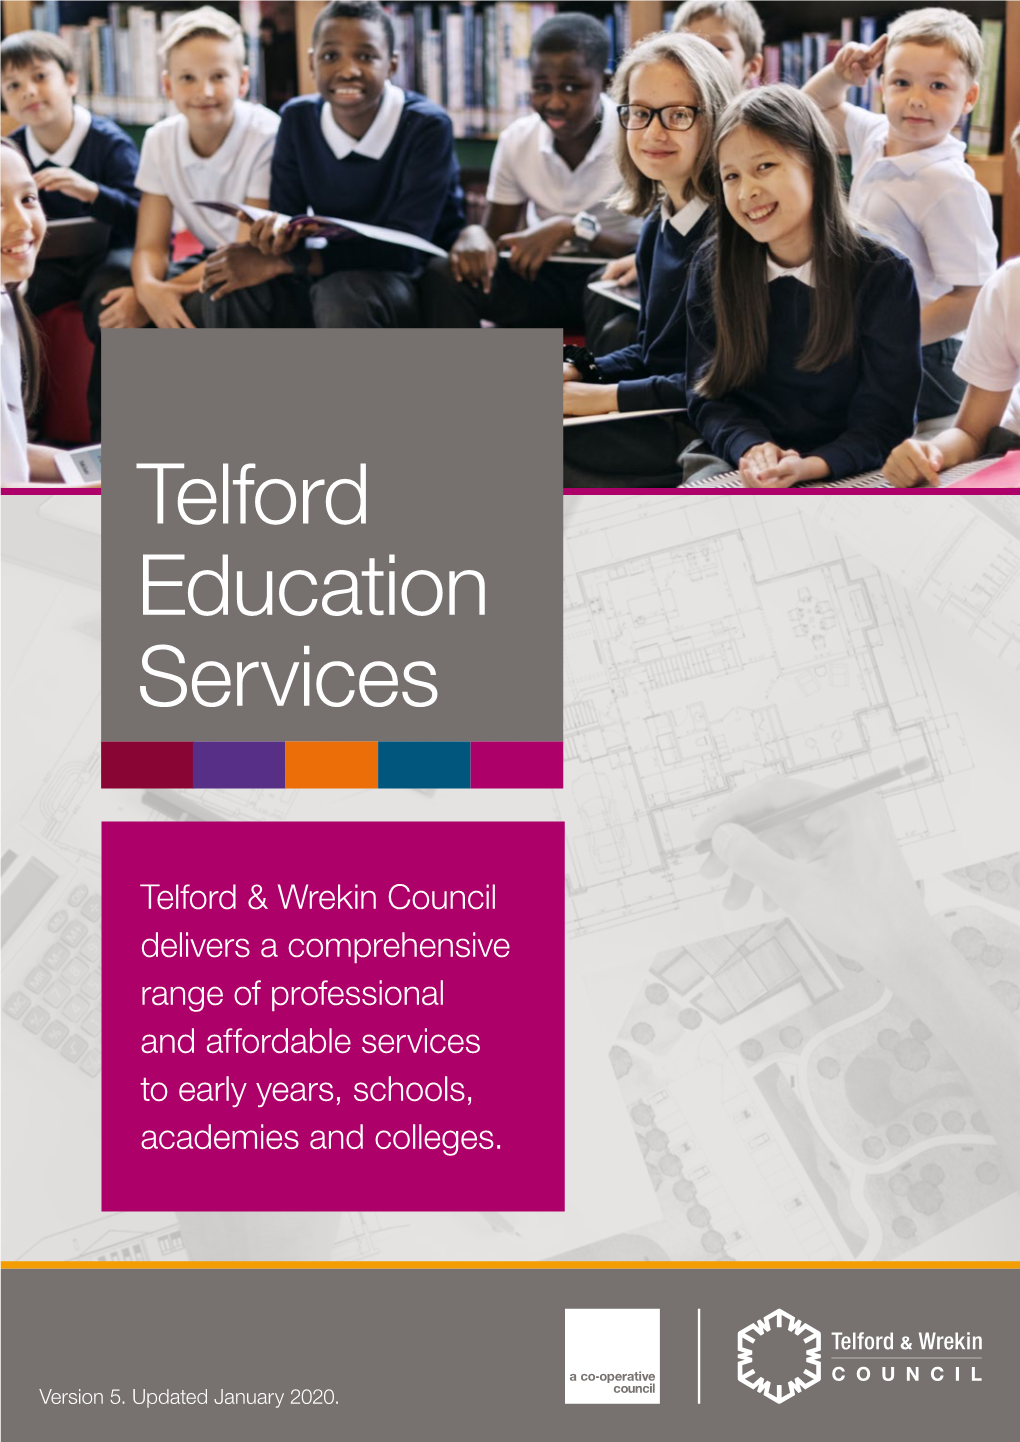 Telford Education Services